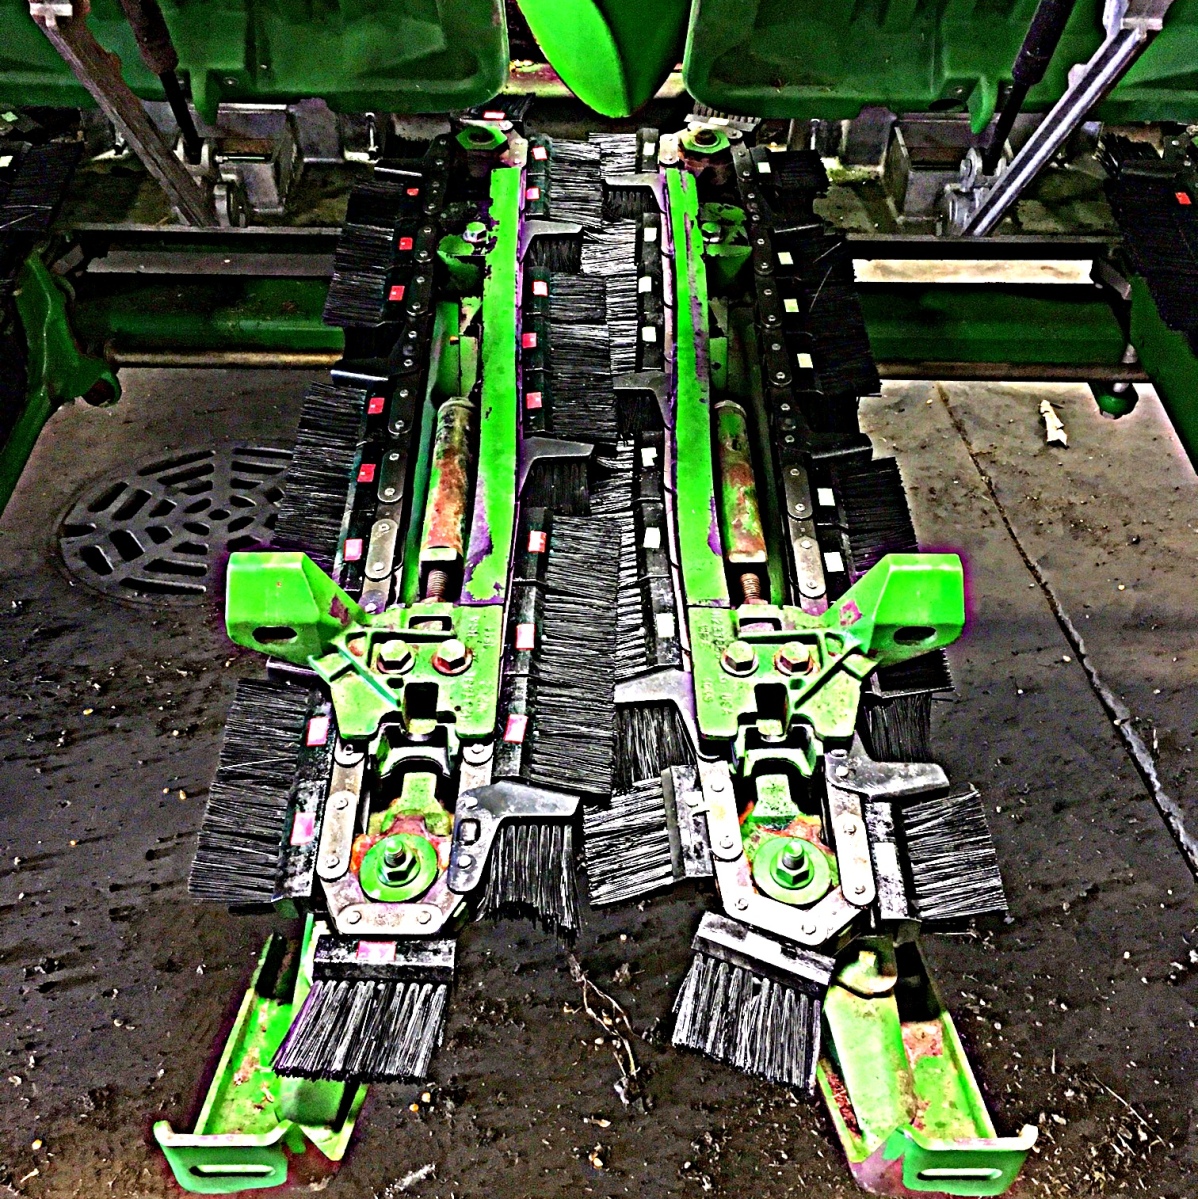 360 Yield Saver Brushes vs OEM Gathering Chains on JD 612C ...